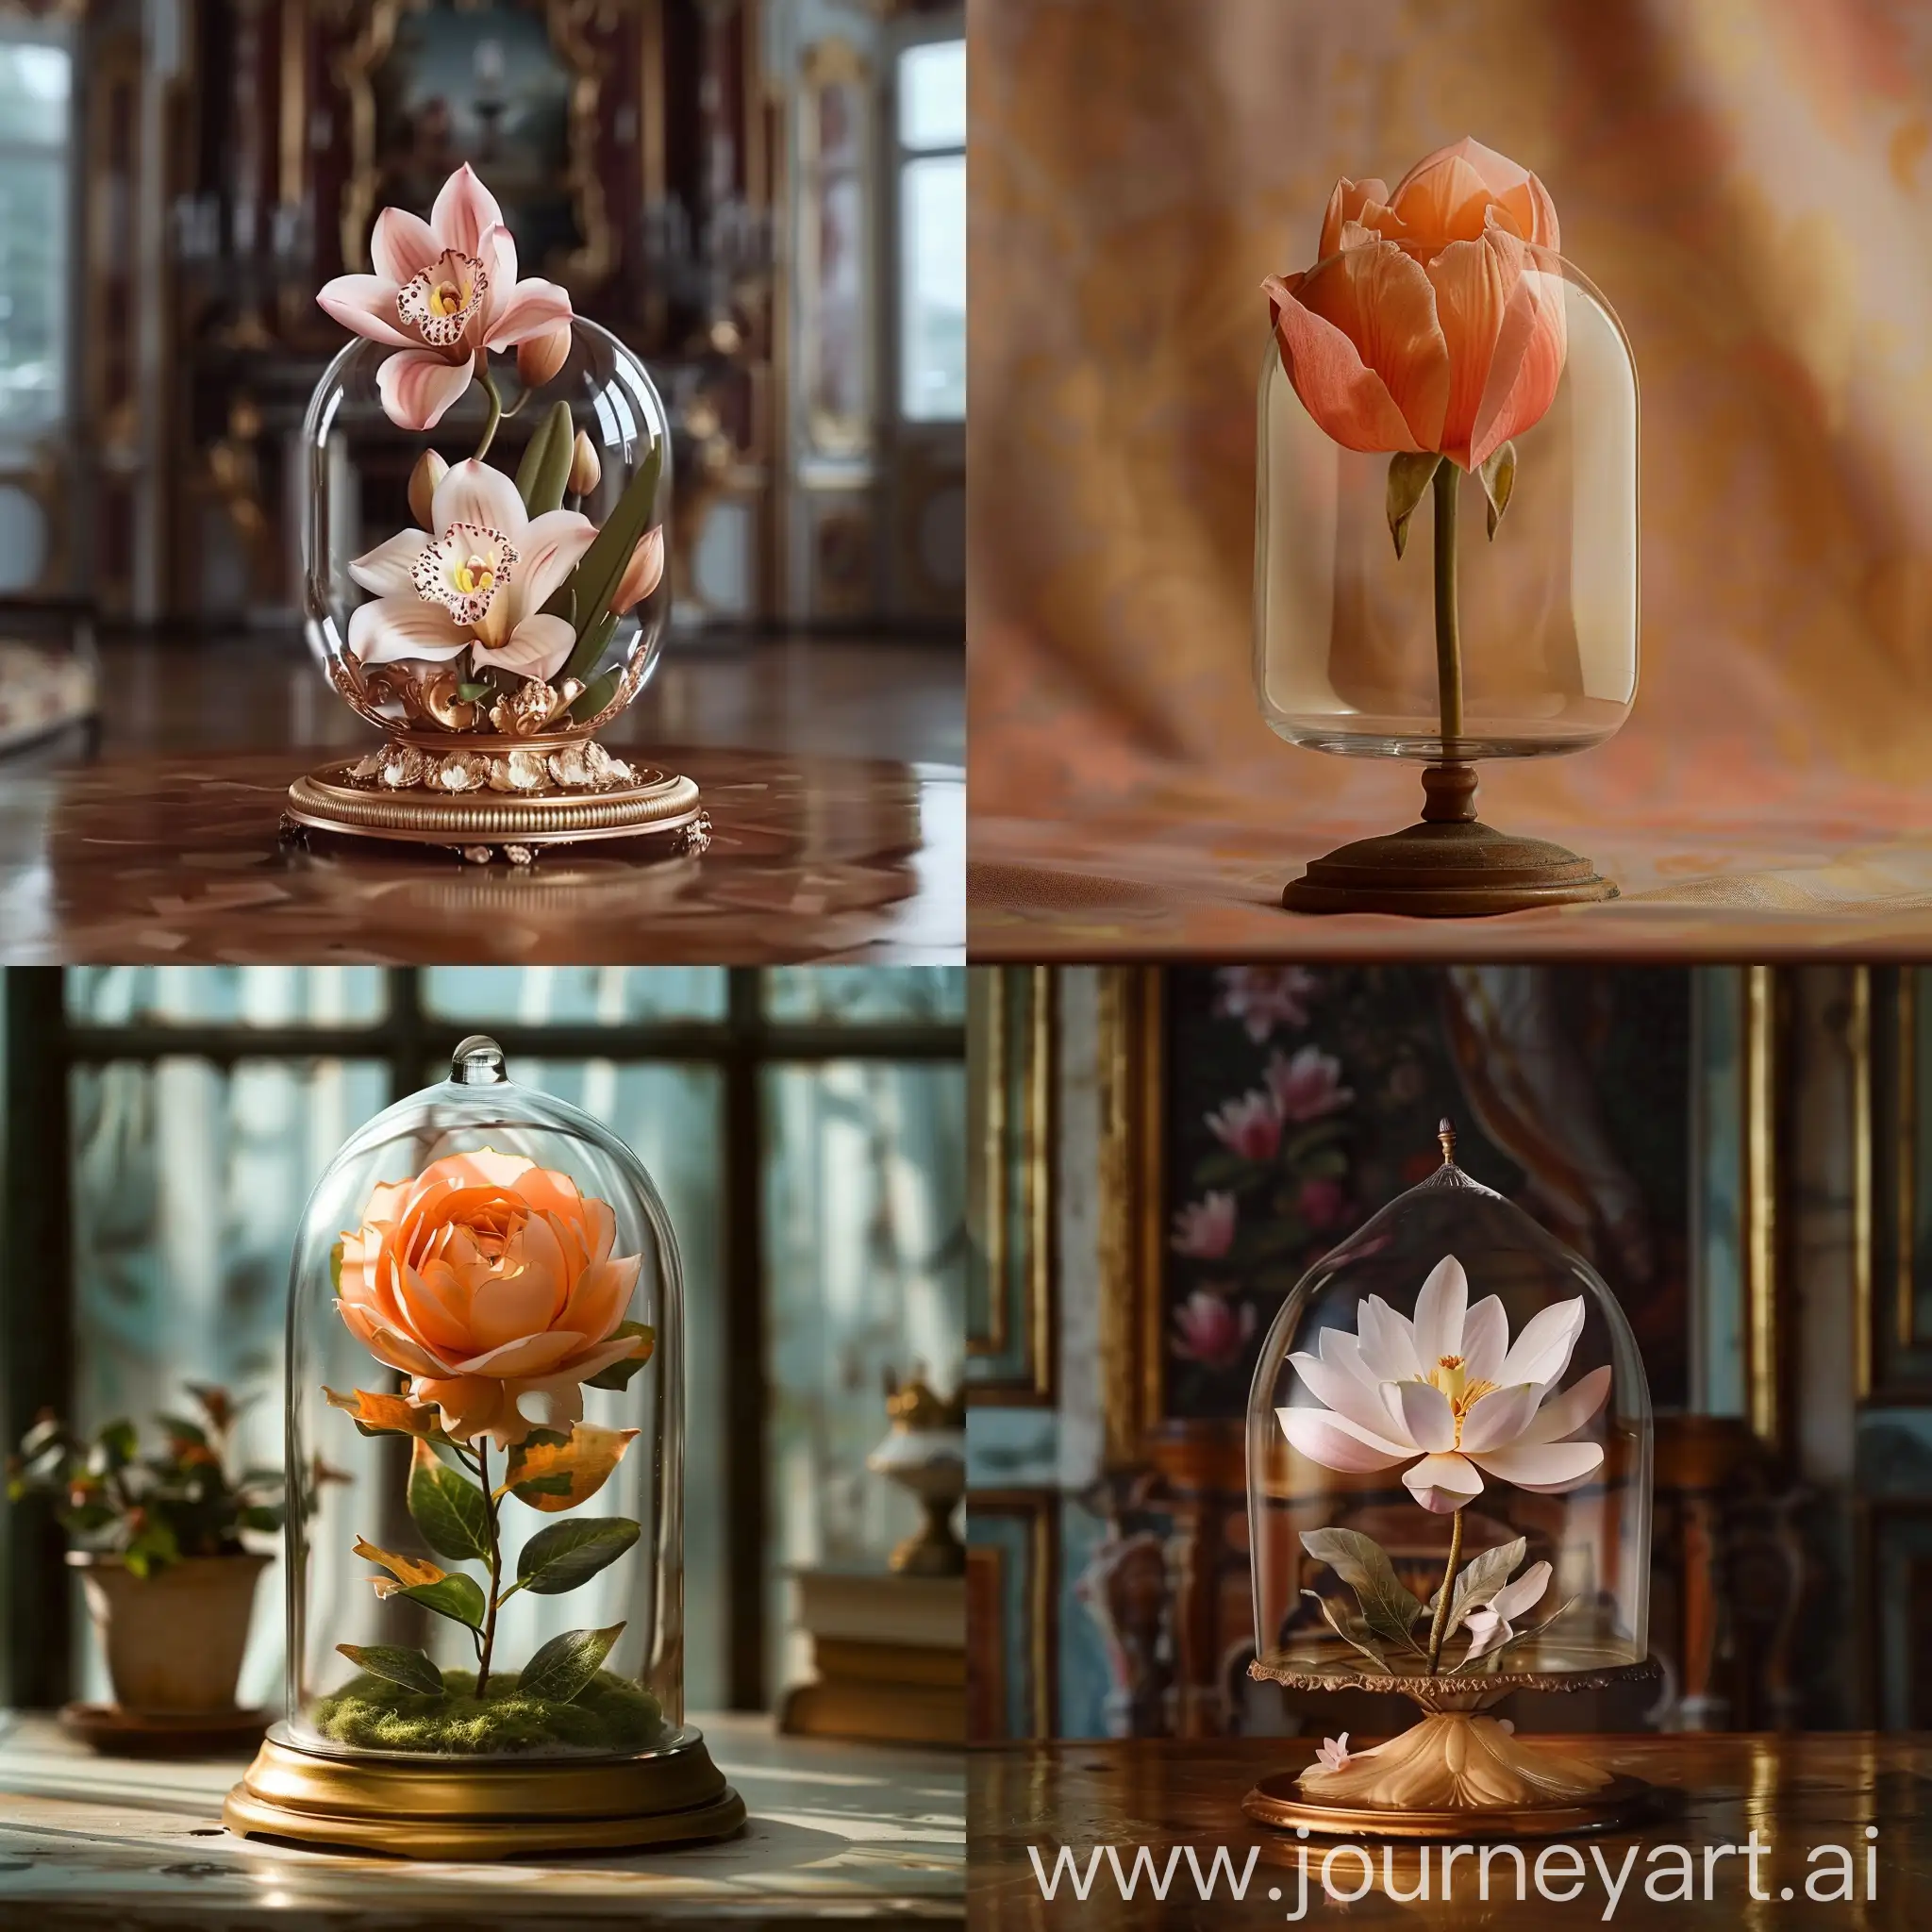 Exquisite-Glass-Dome-Flower-Display-in-Royal-House-Setting